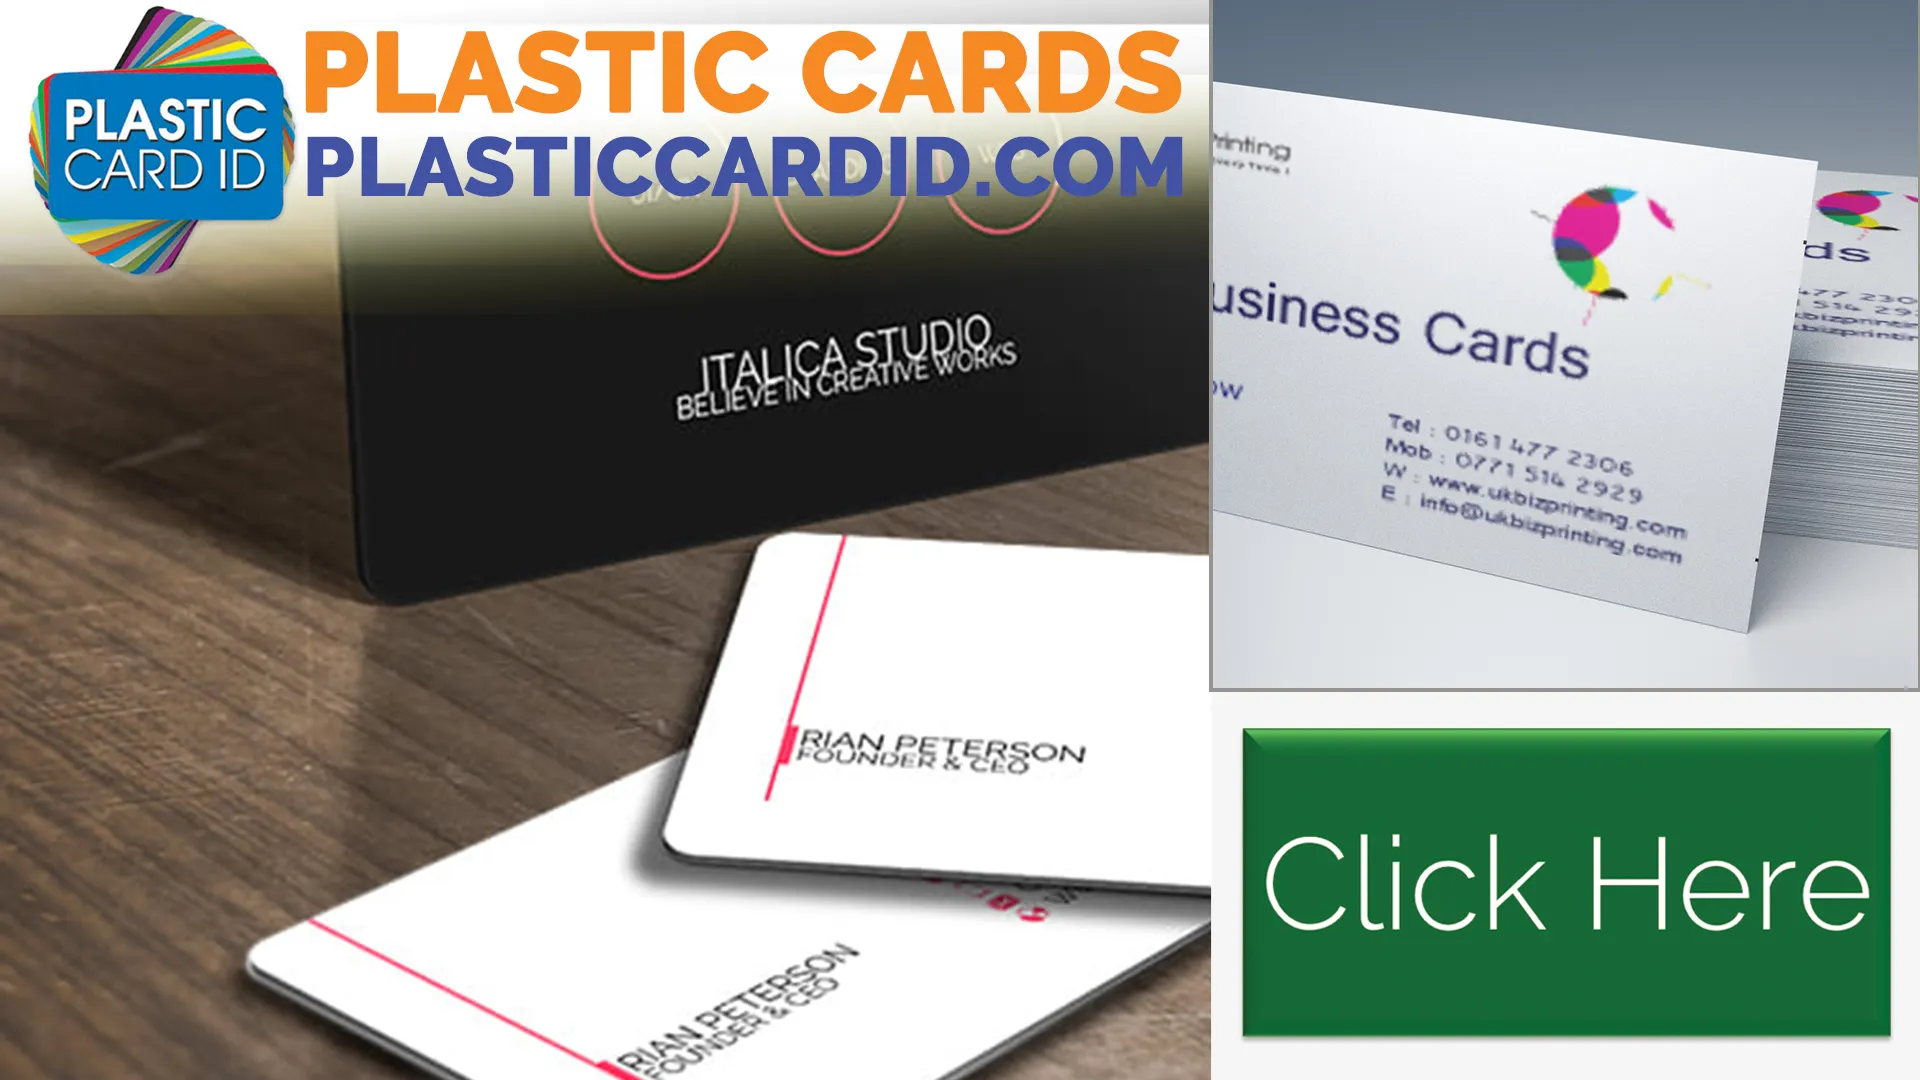 Celebrating the Spectrum of Our Plastic Card Offerings